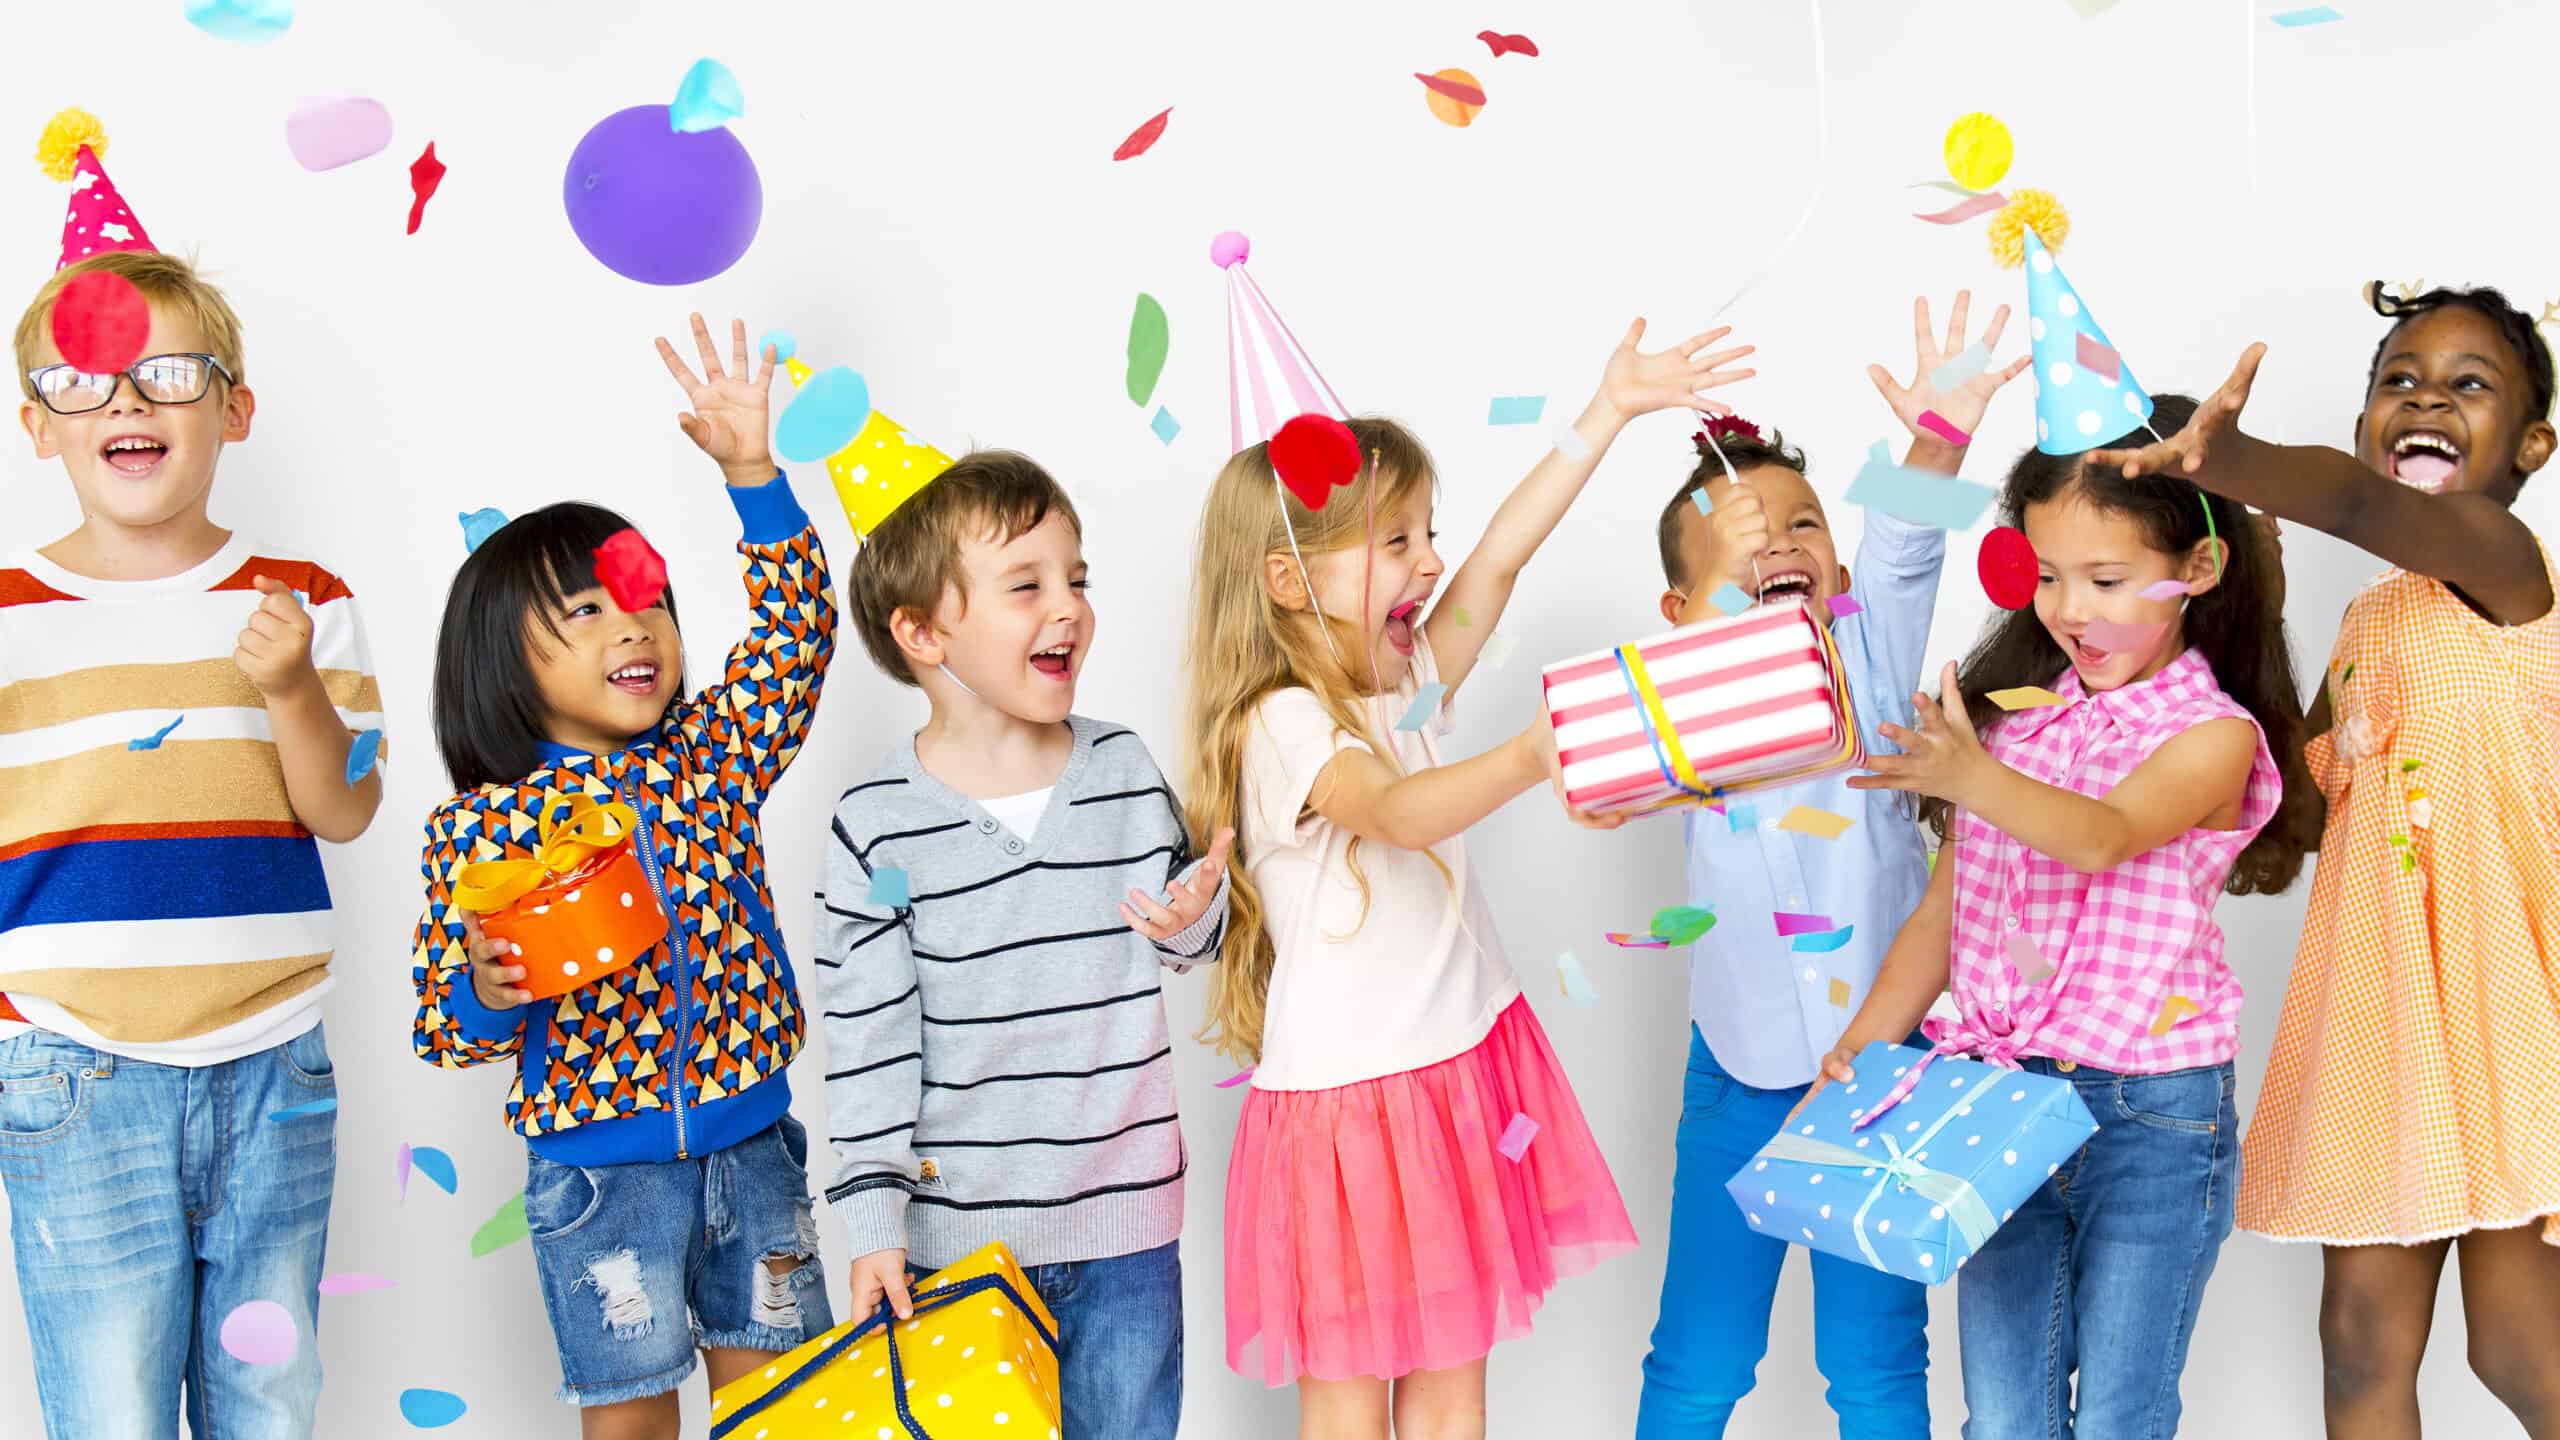 Group,Of,Kids,Celebrate,Birthday,Party,Together